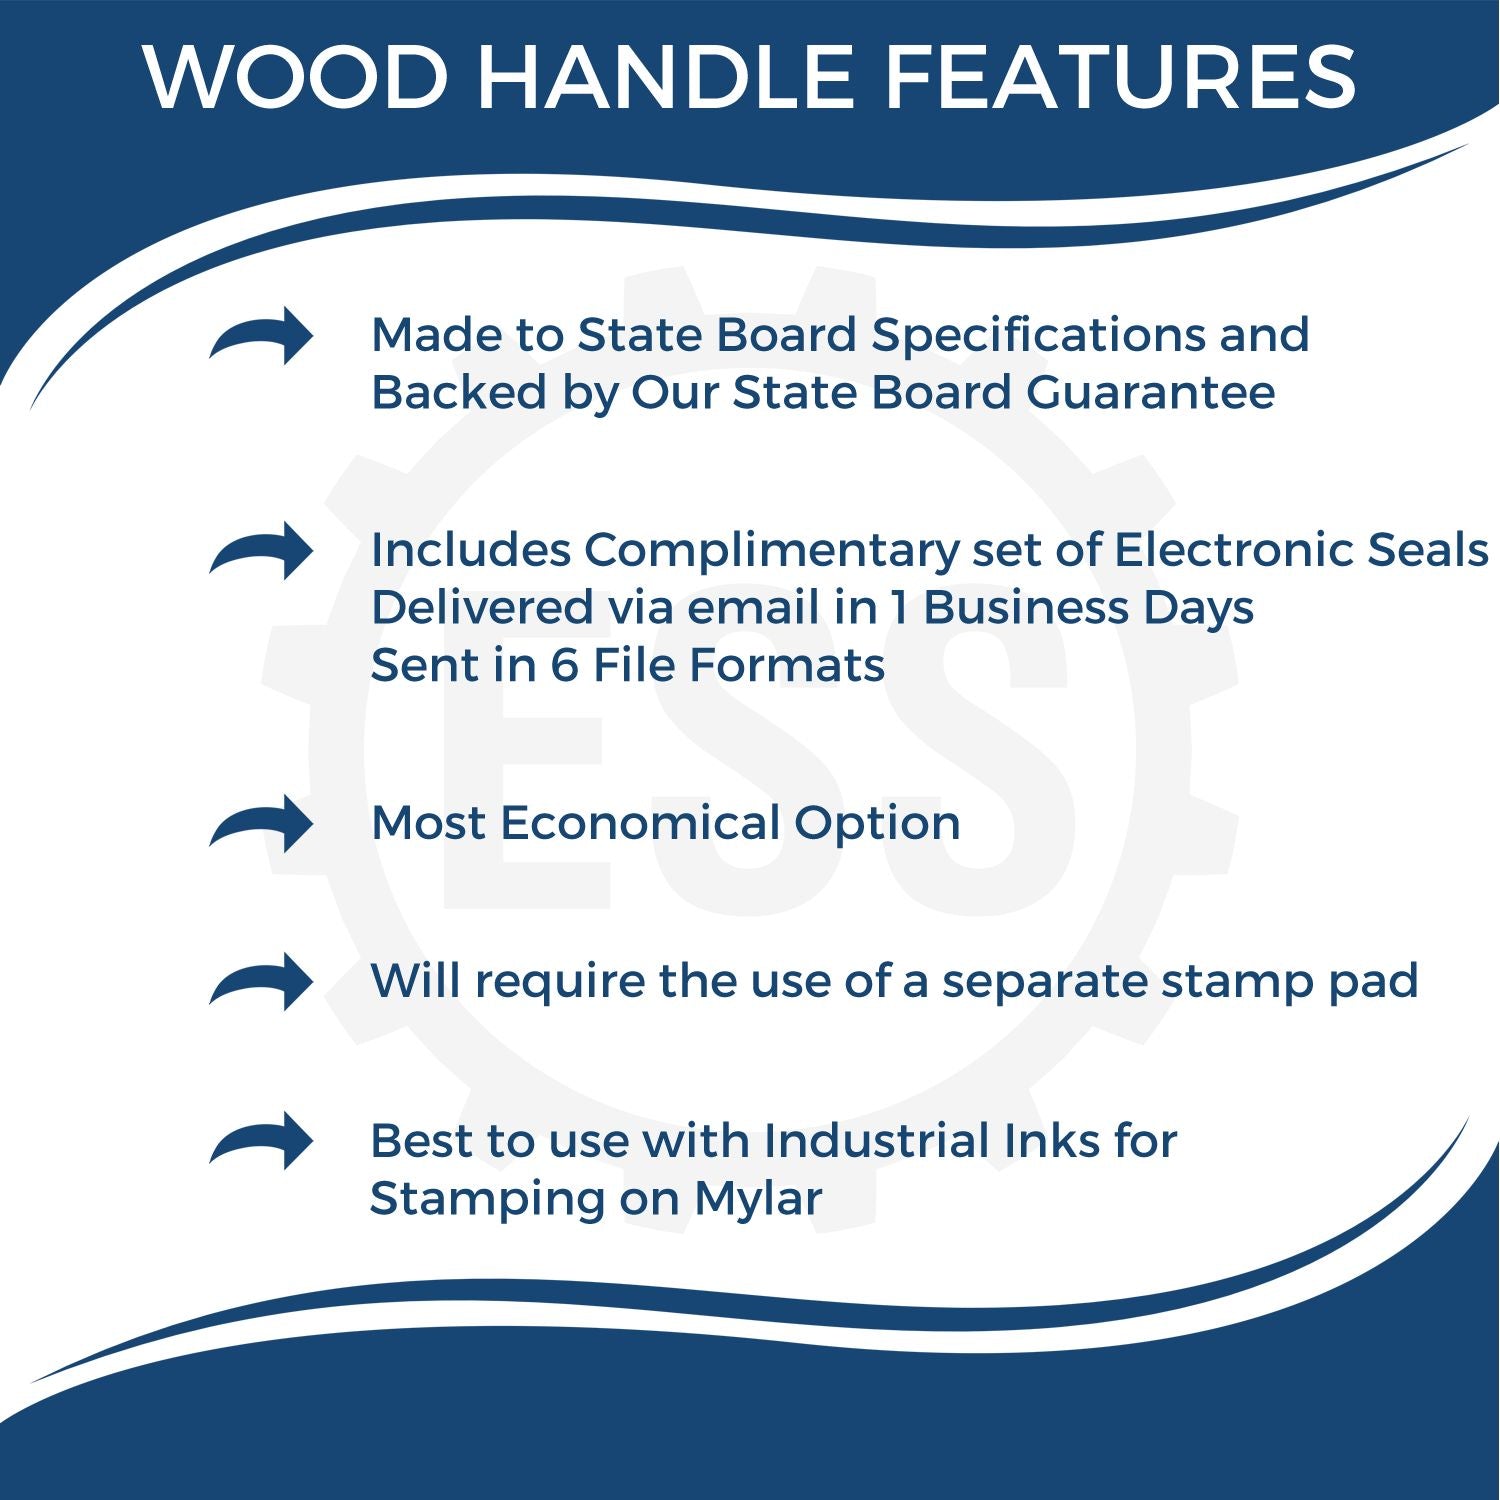 Certified Stamp. Wooden Round Stamper and Stamp with Text